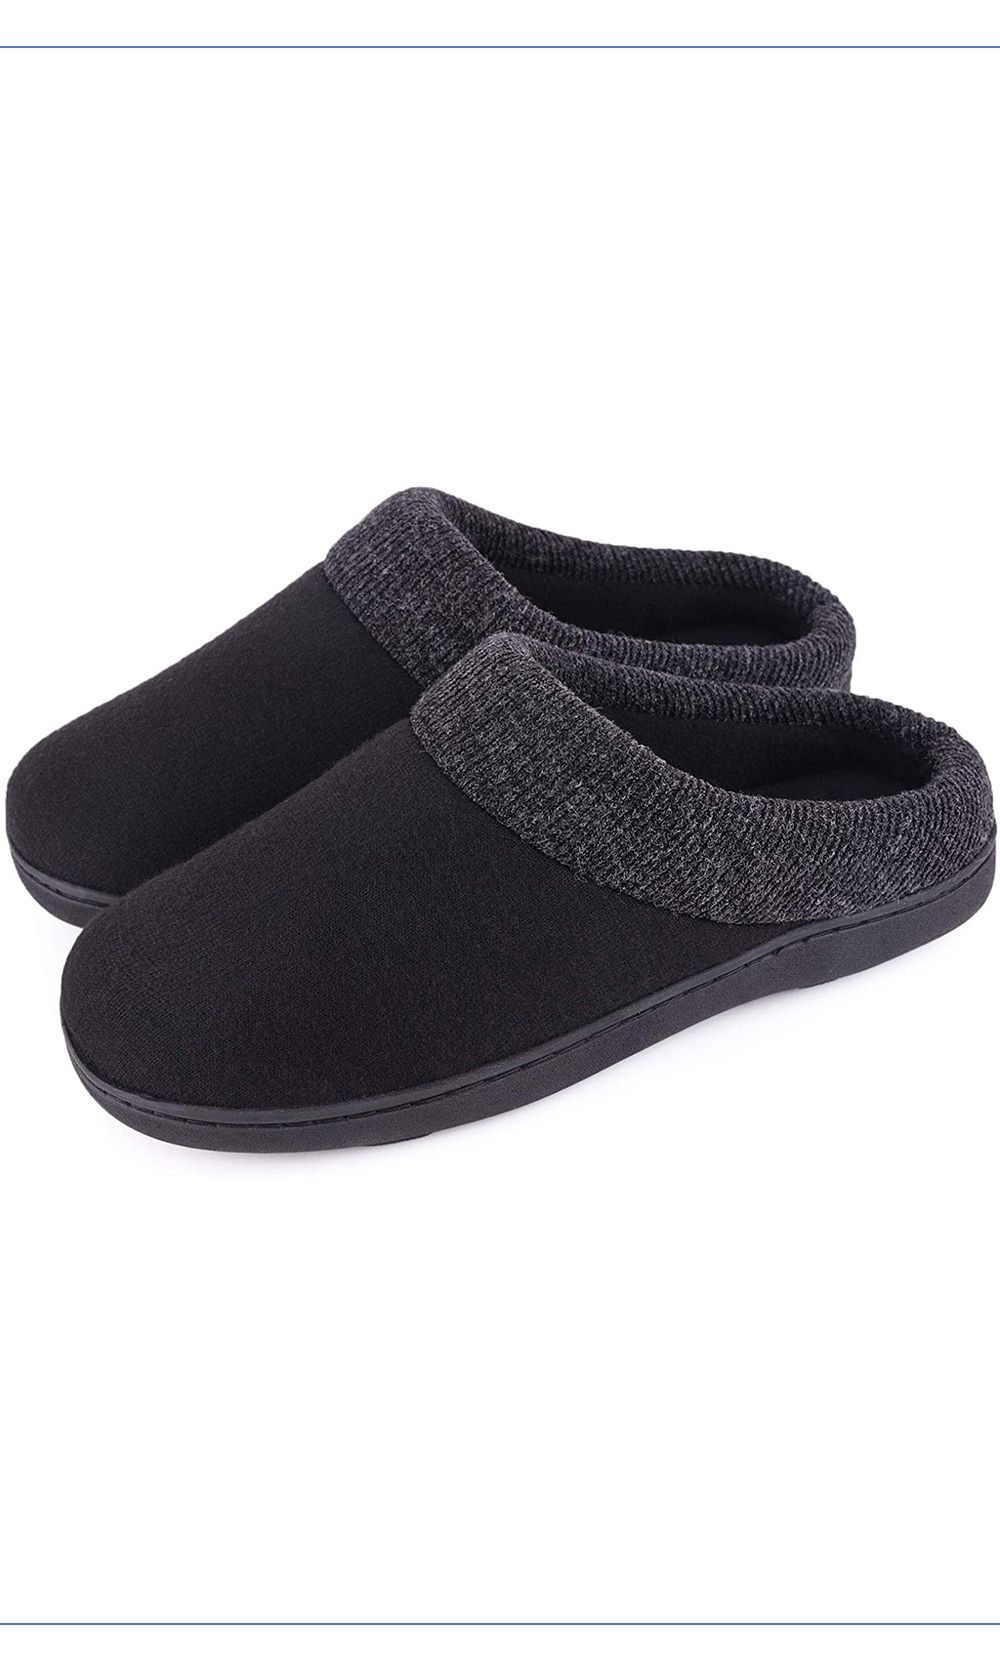 women's slippers with soles